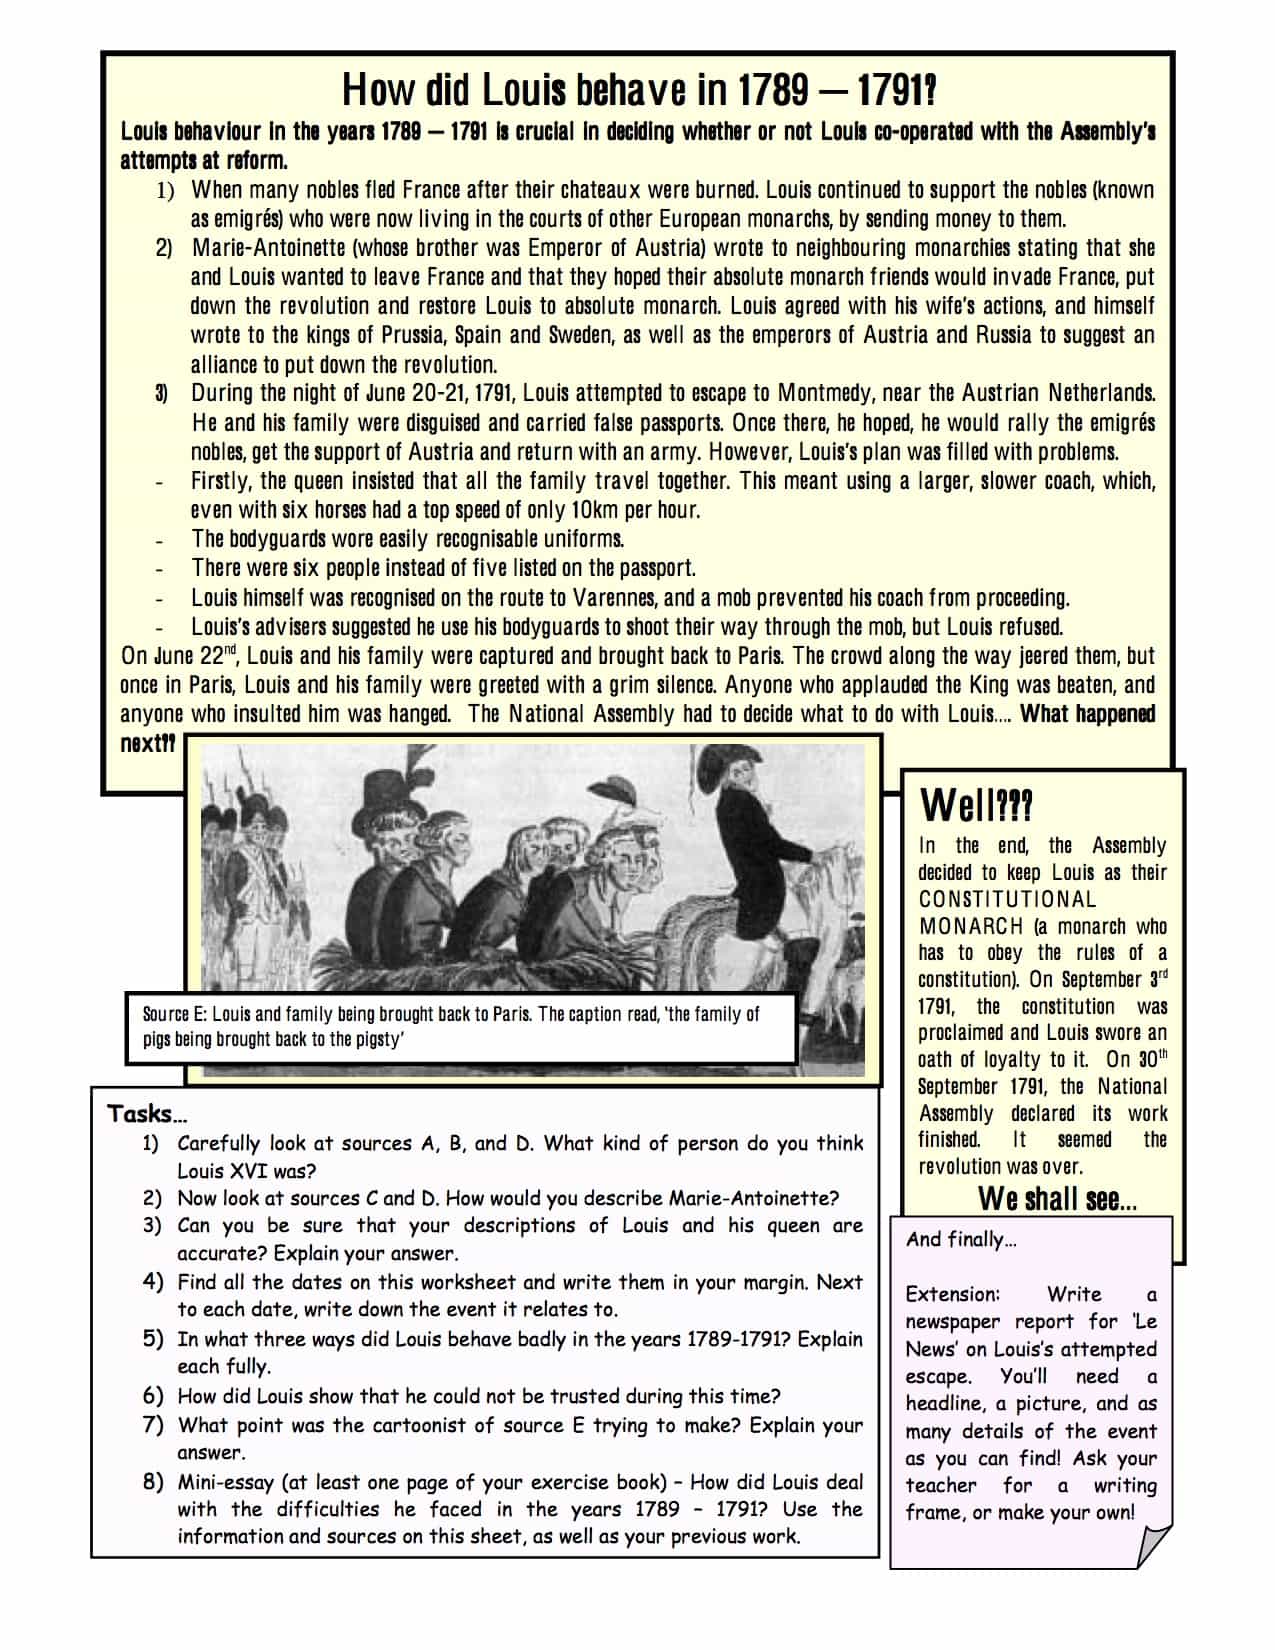 King Louis XVI and the Revolution Facts & Information Worksheet